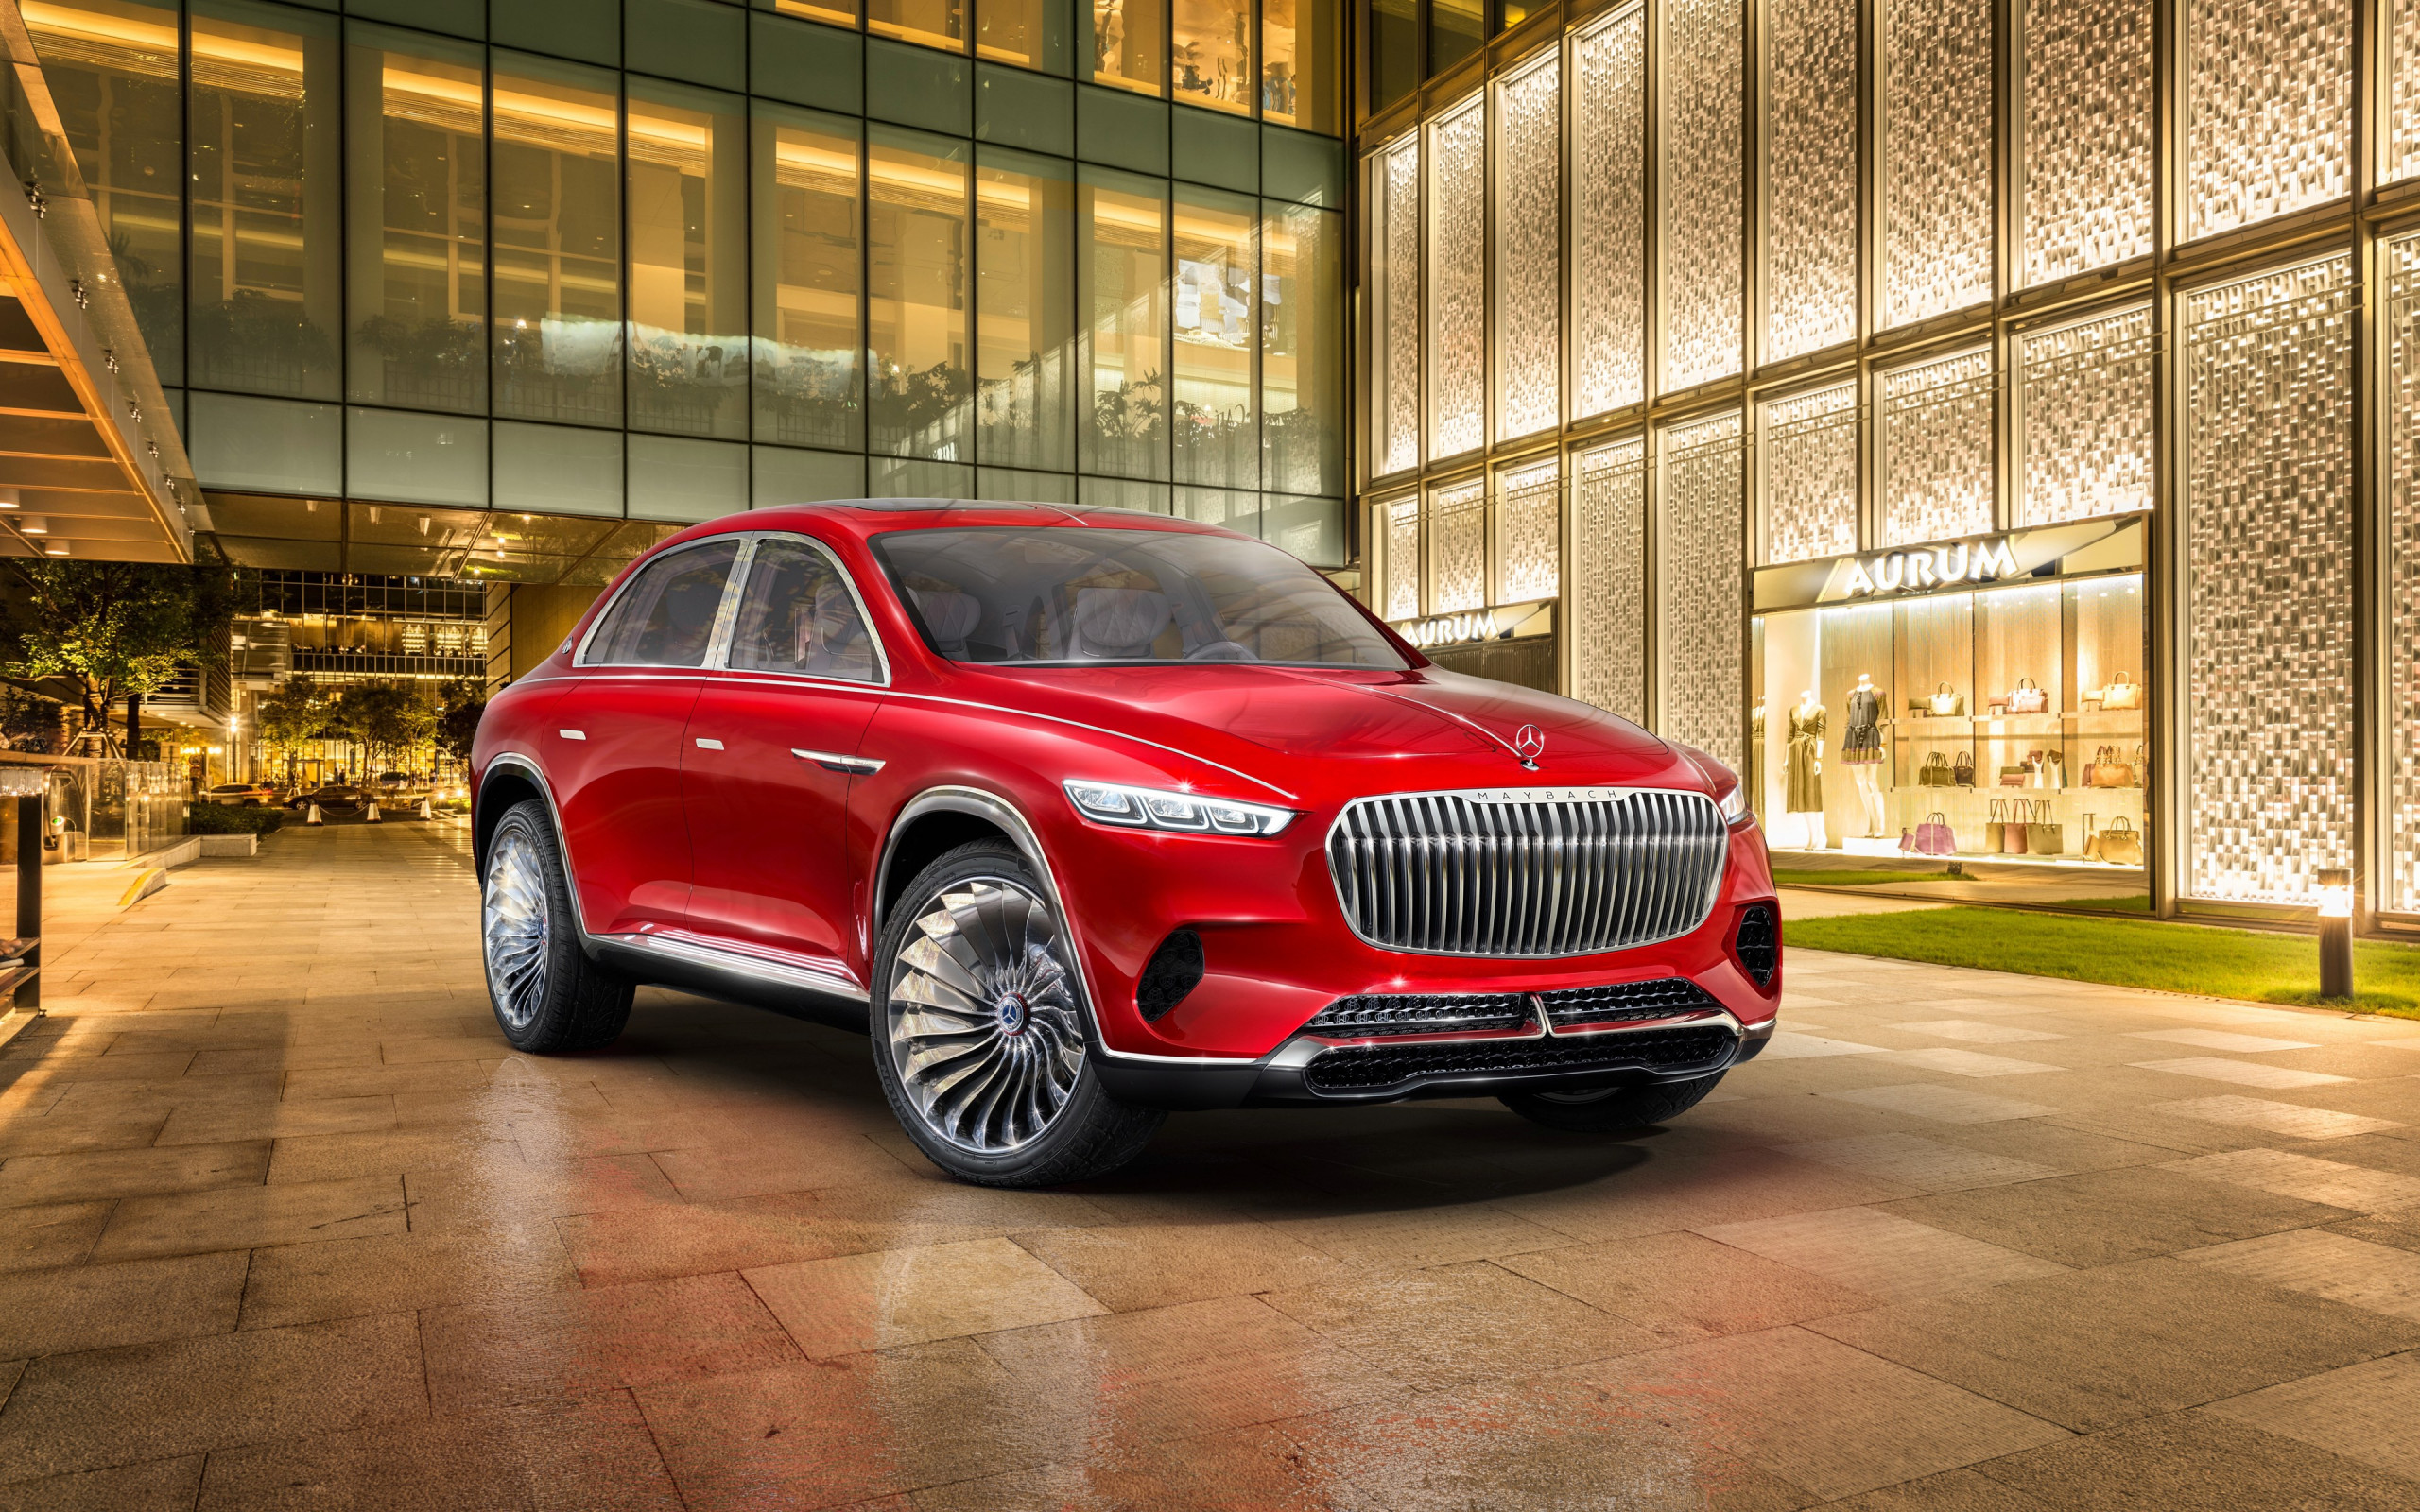 The Vision Mercedes Maybach Ultimate Luxury wallpaper 2560x1600